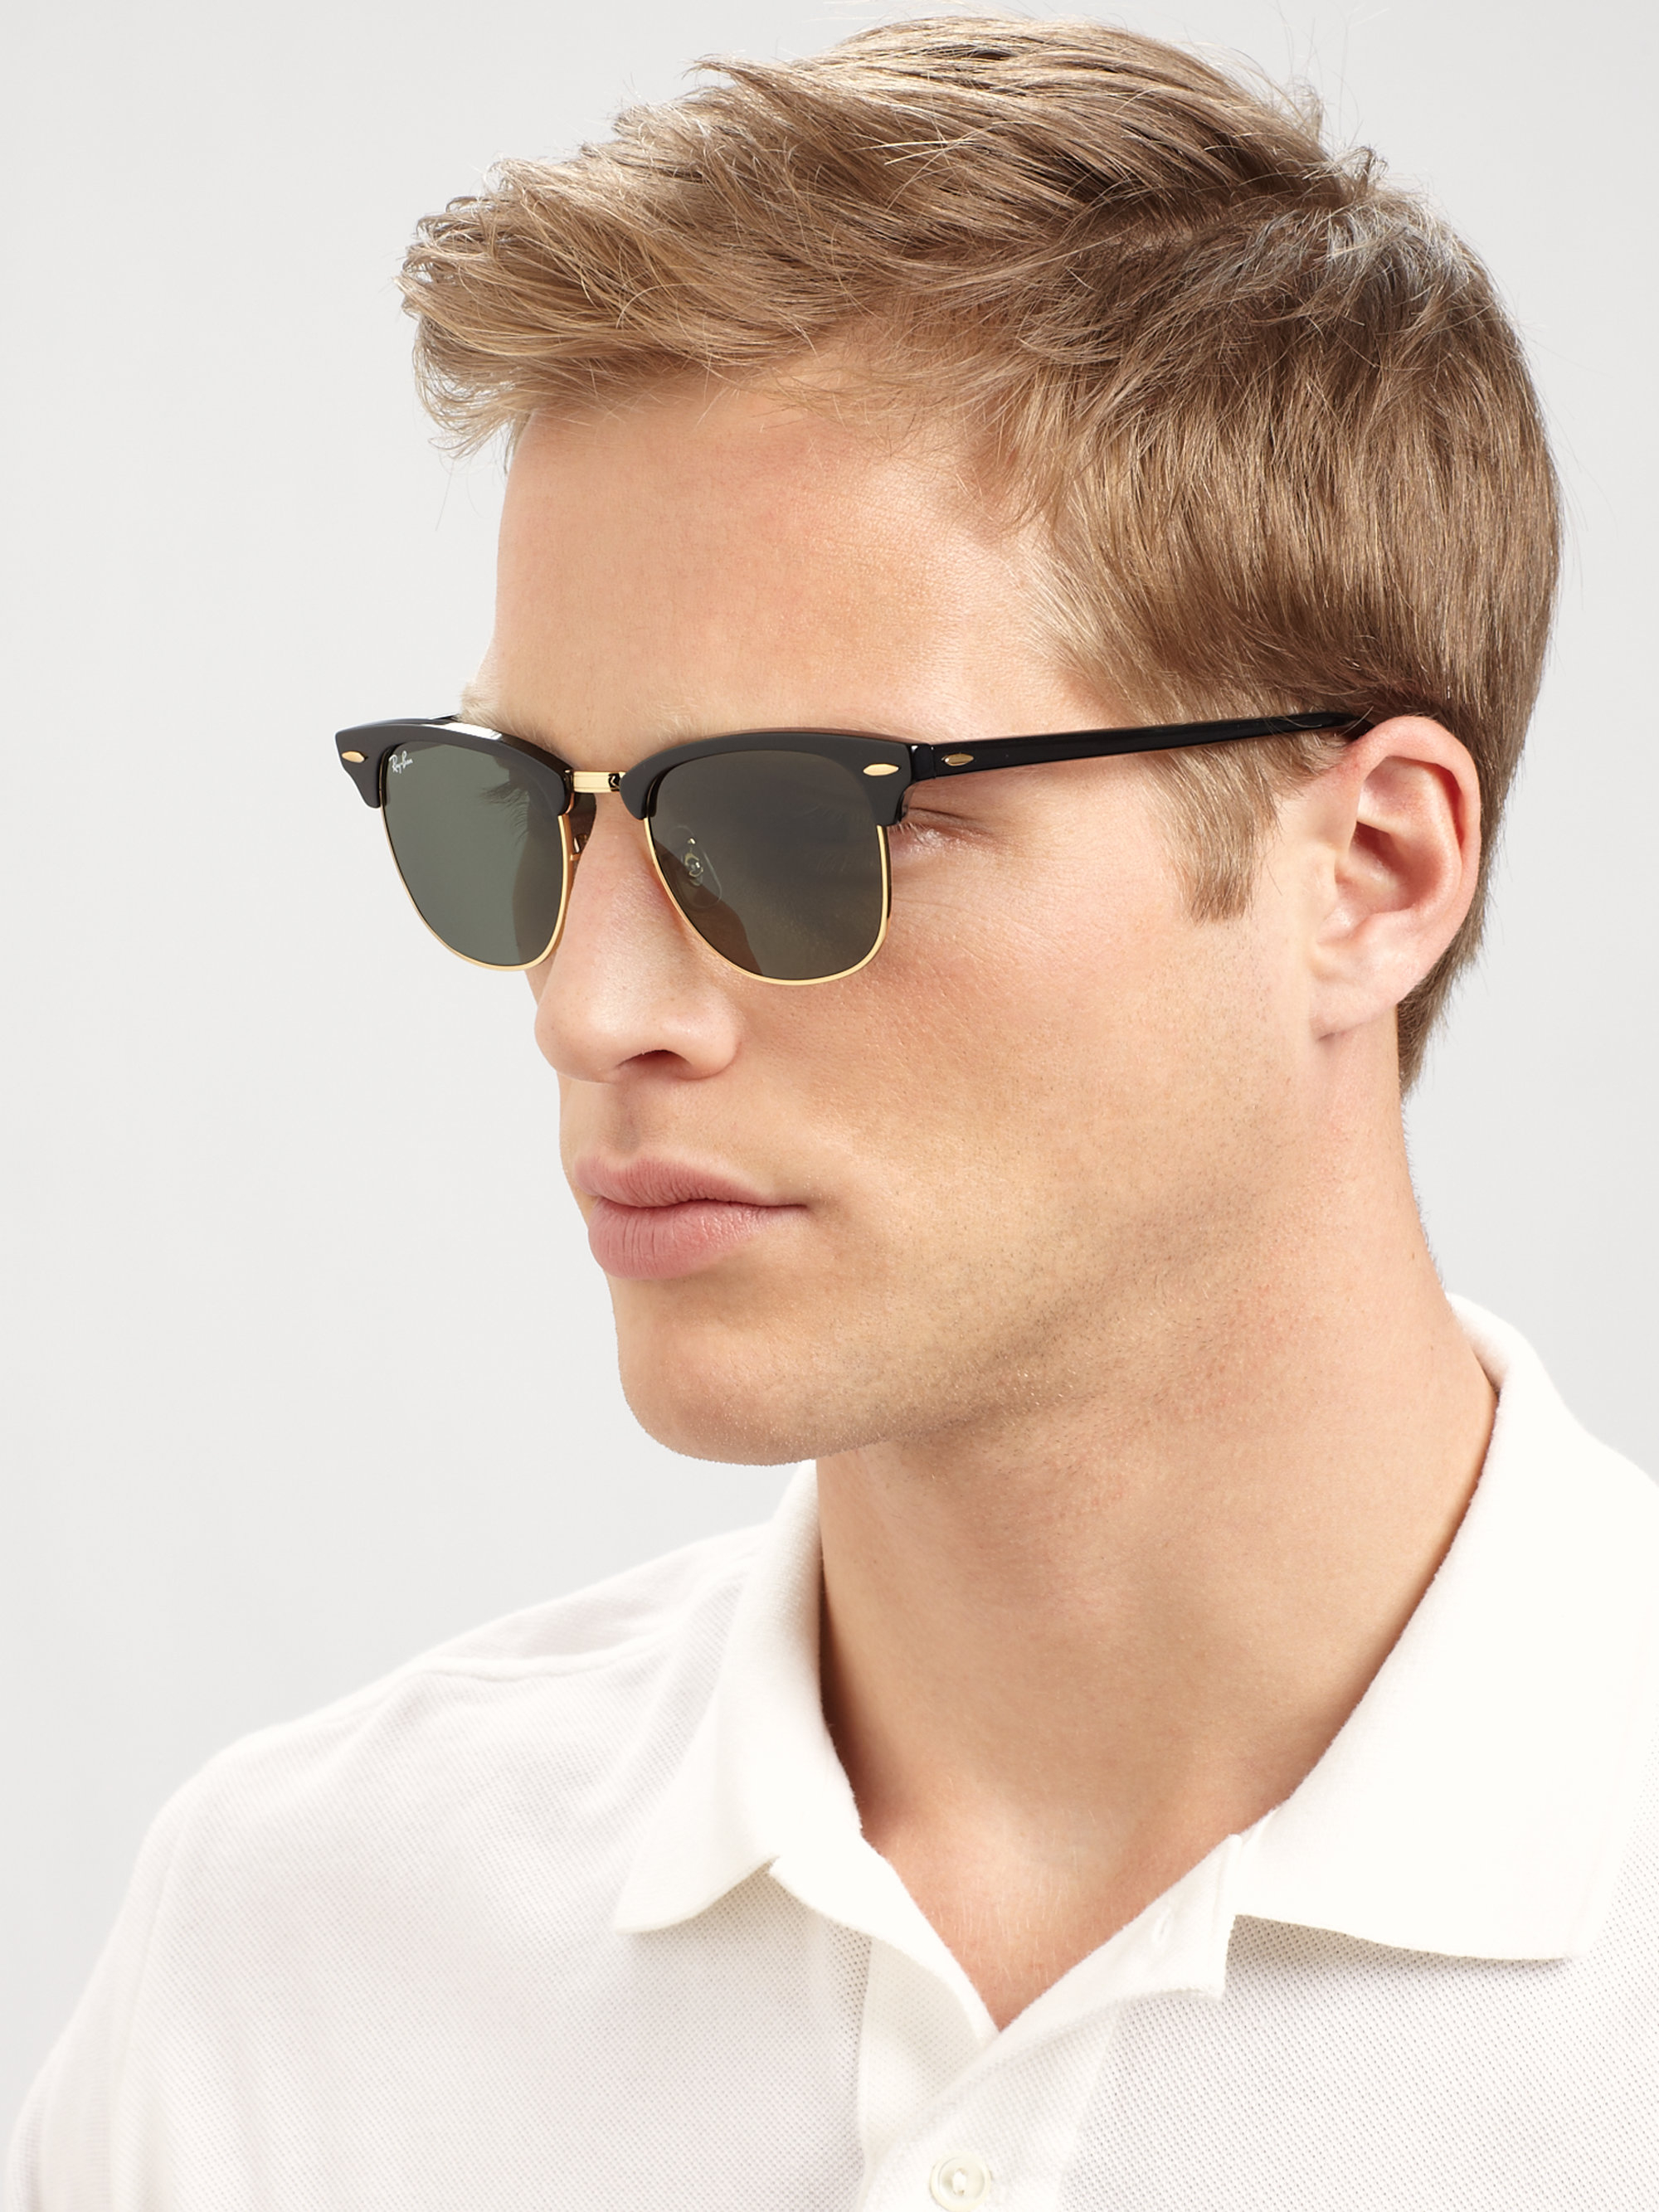 ray ban sunglasses clubmaster classic